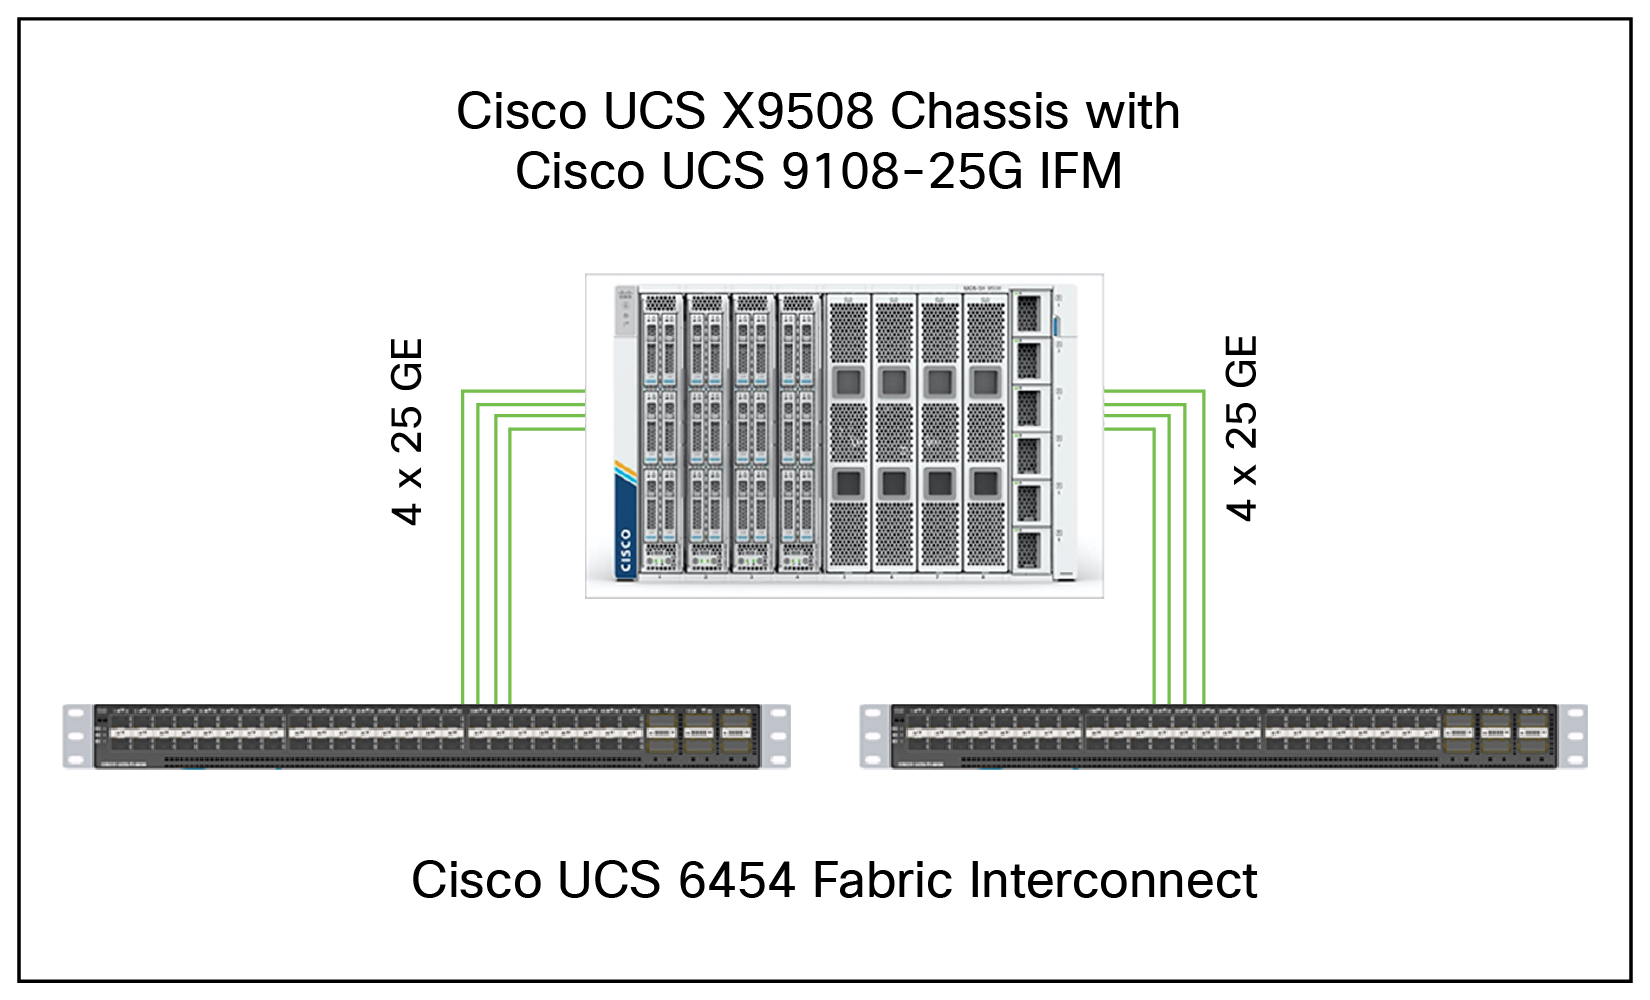 Cisco UCS X9508 Chassis connectivity to Cisco UCS fabric interconnects